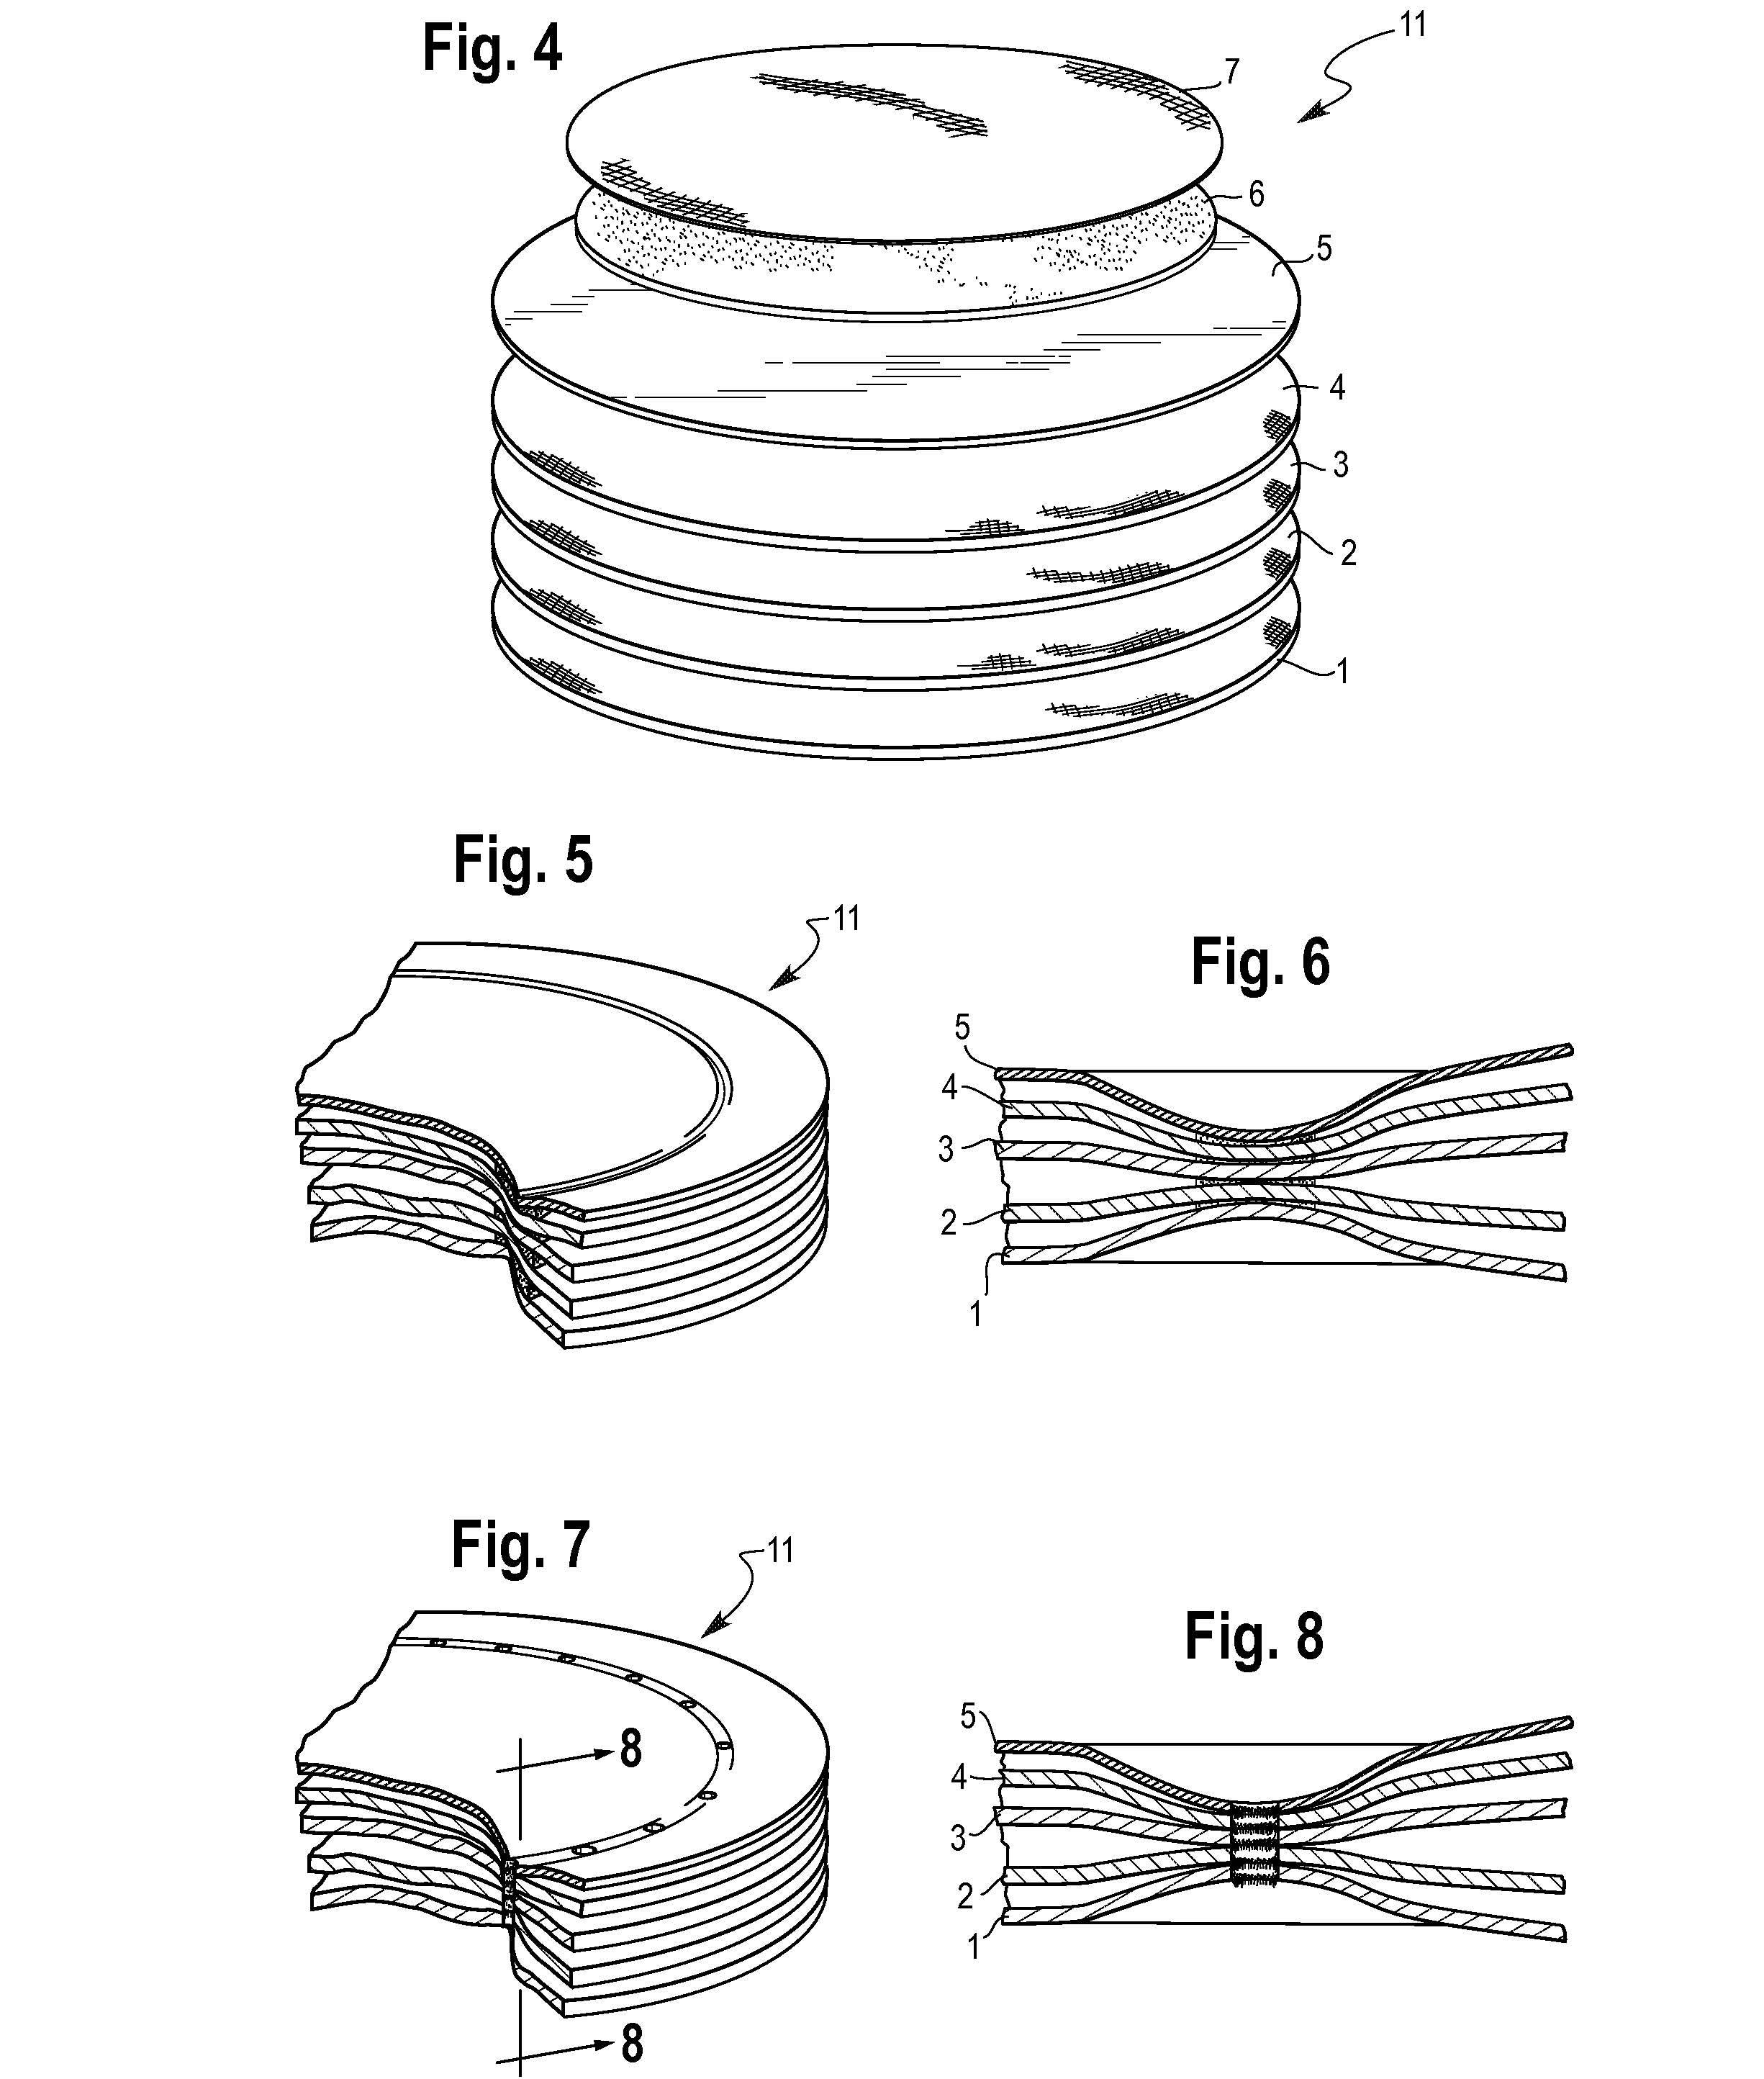 Food package insert for preserving freshness and method of manufacture